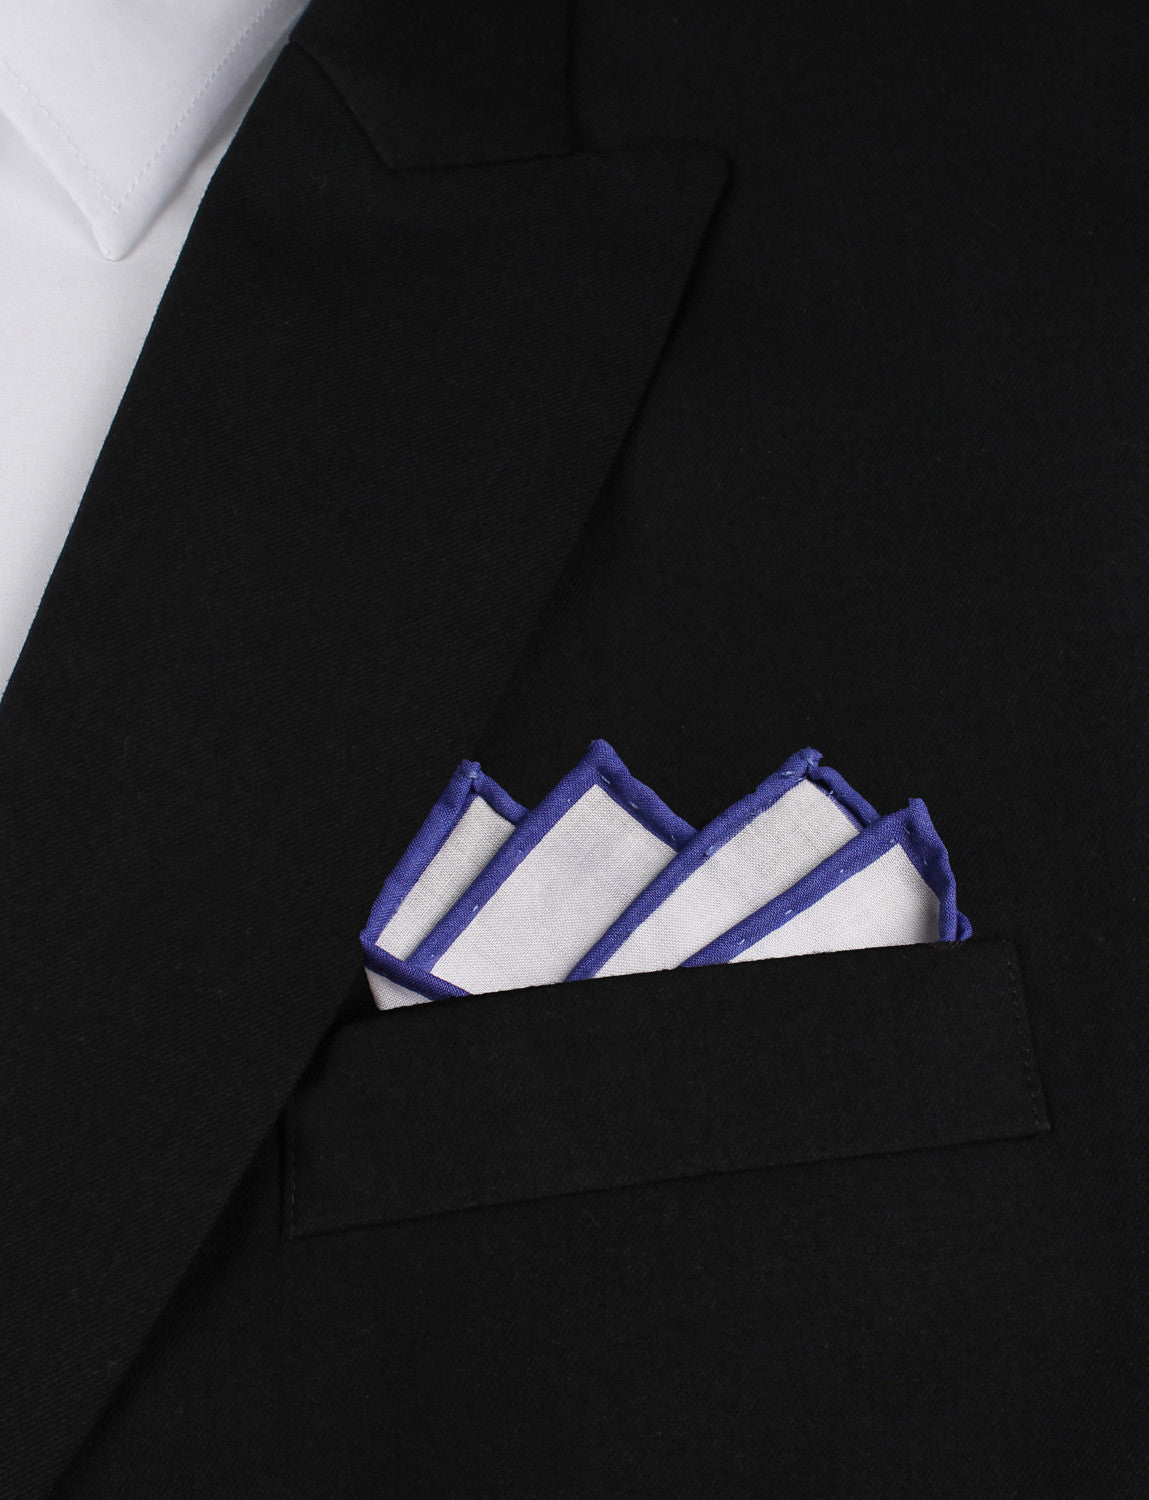 White Cotton Pocket Square with Purple Border Point Fold